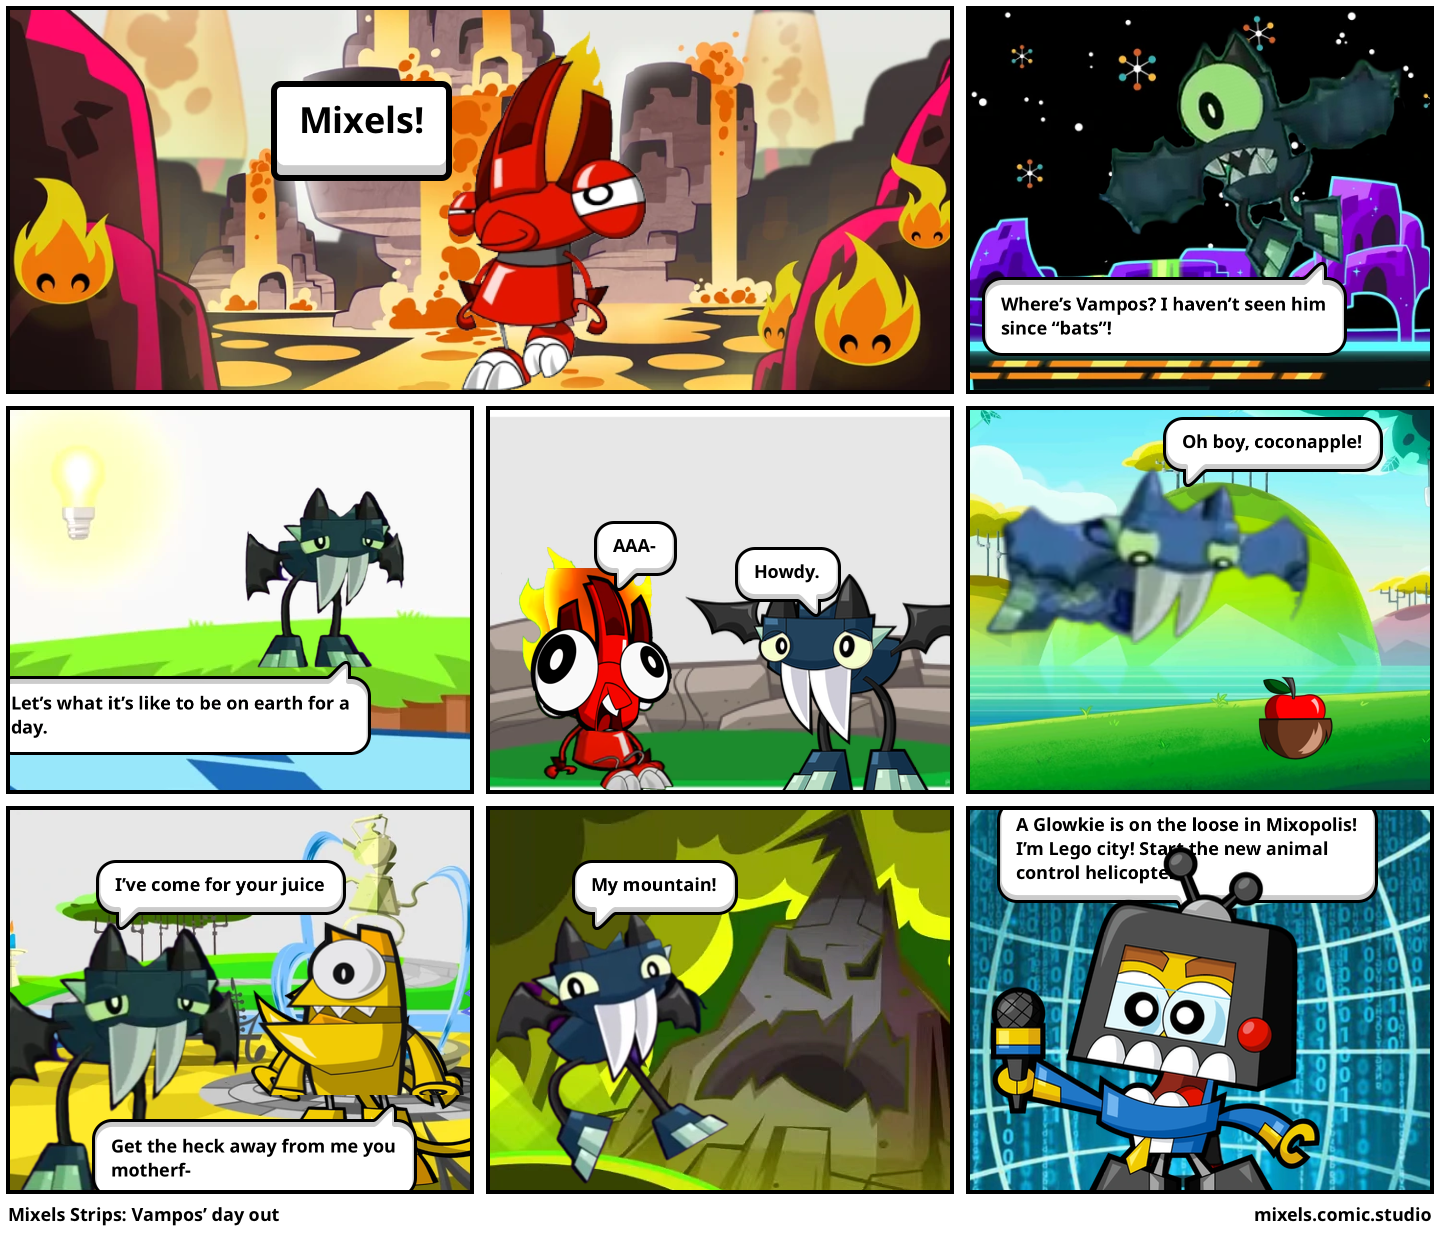 Mixels Strips: Vampos’ day out